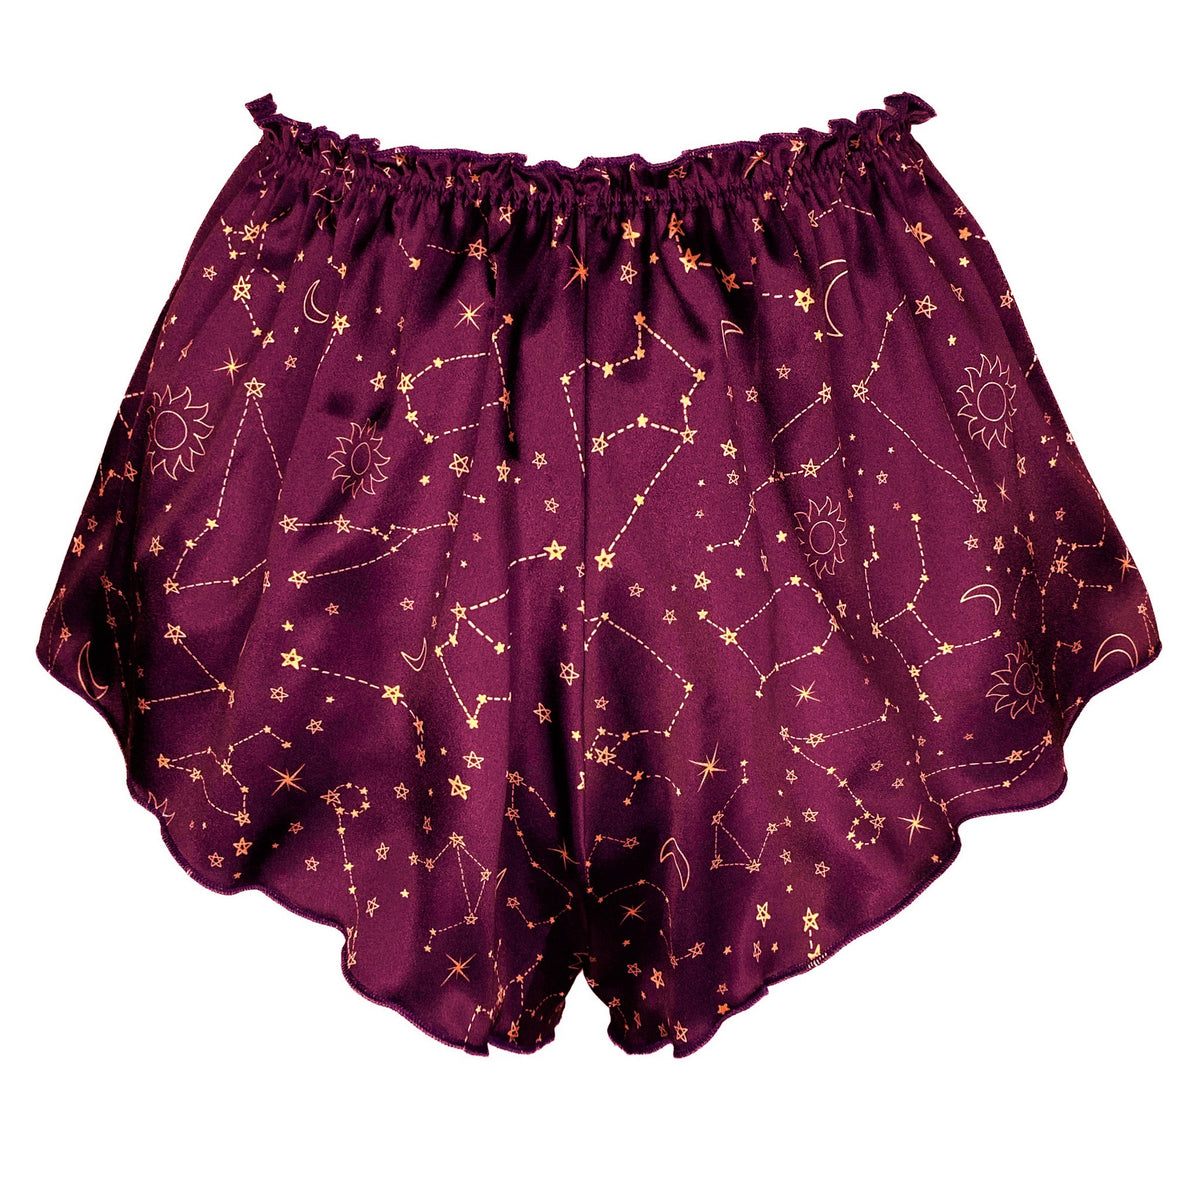 High Waisted Classic French Knicker - Blood Moon Stellar